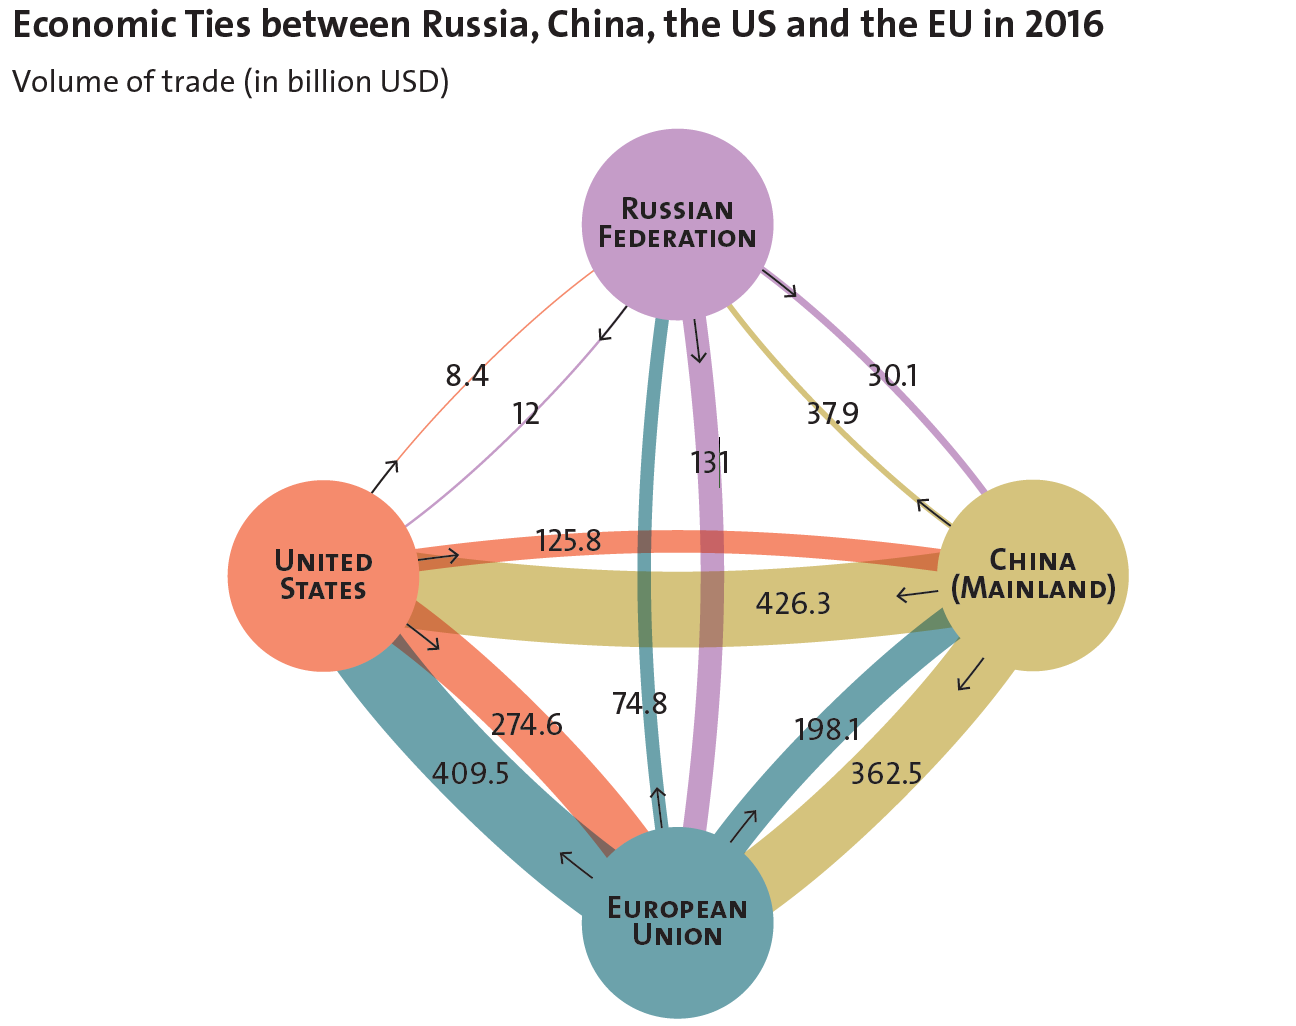 Economic Ties between Russia, China, the US and the EU in 2016